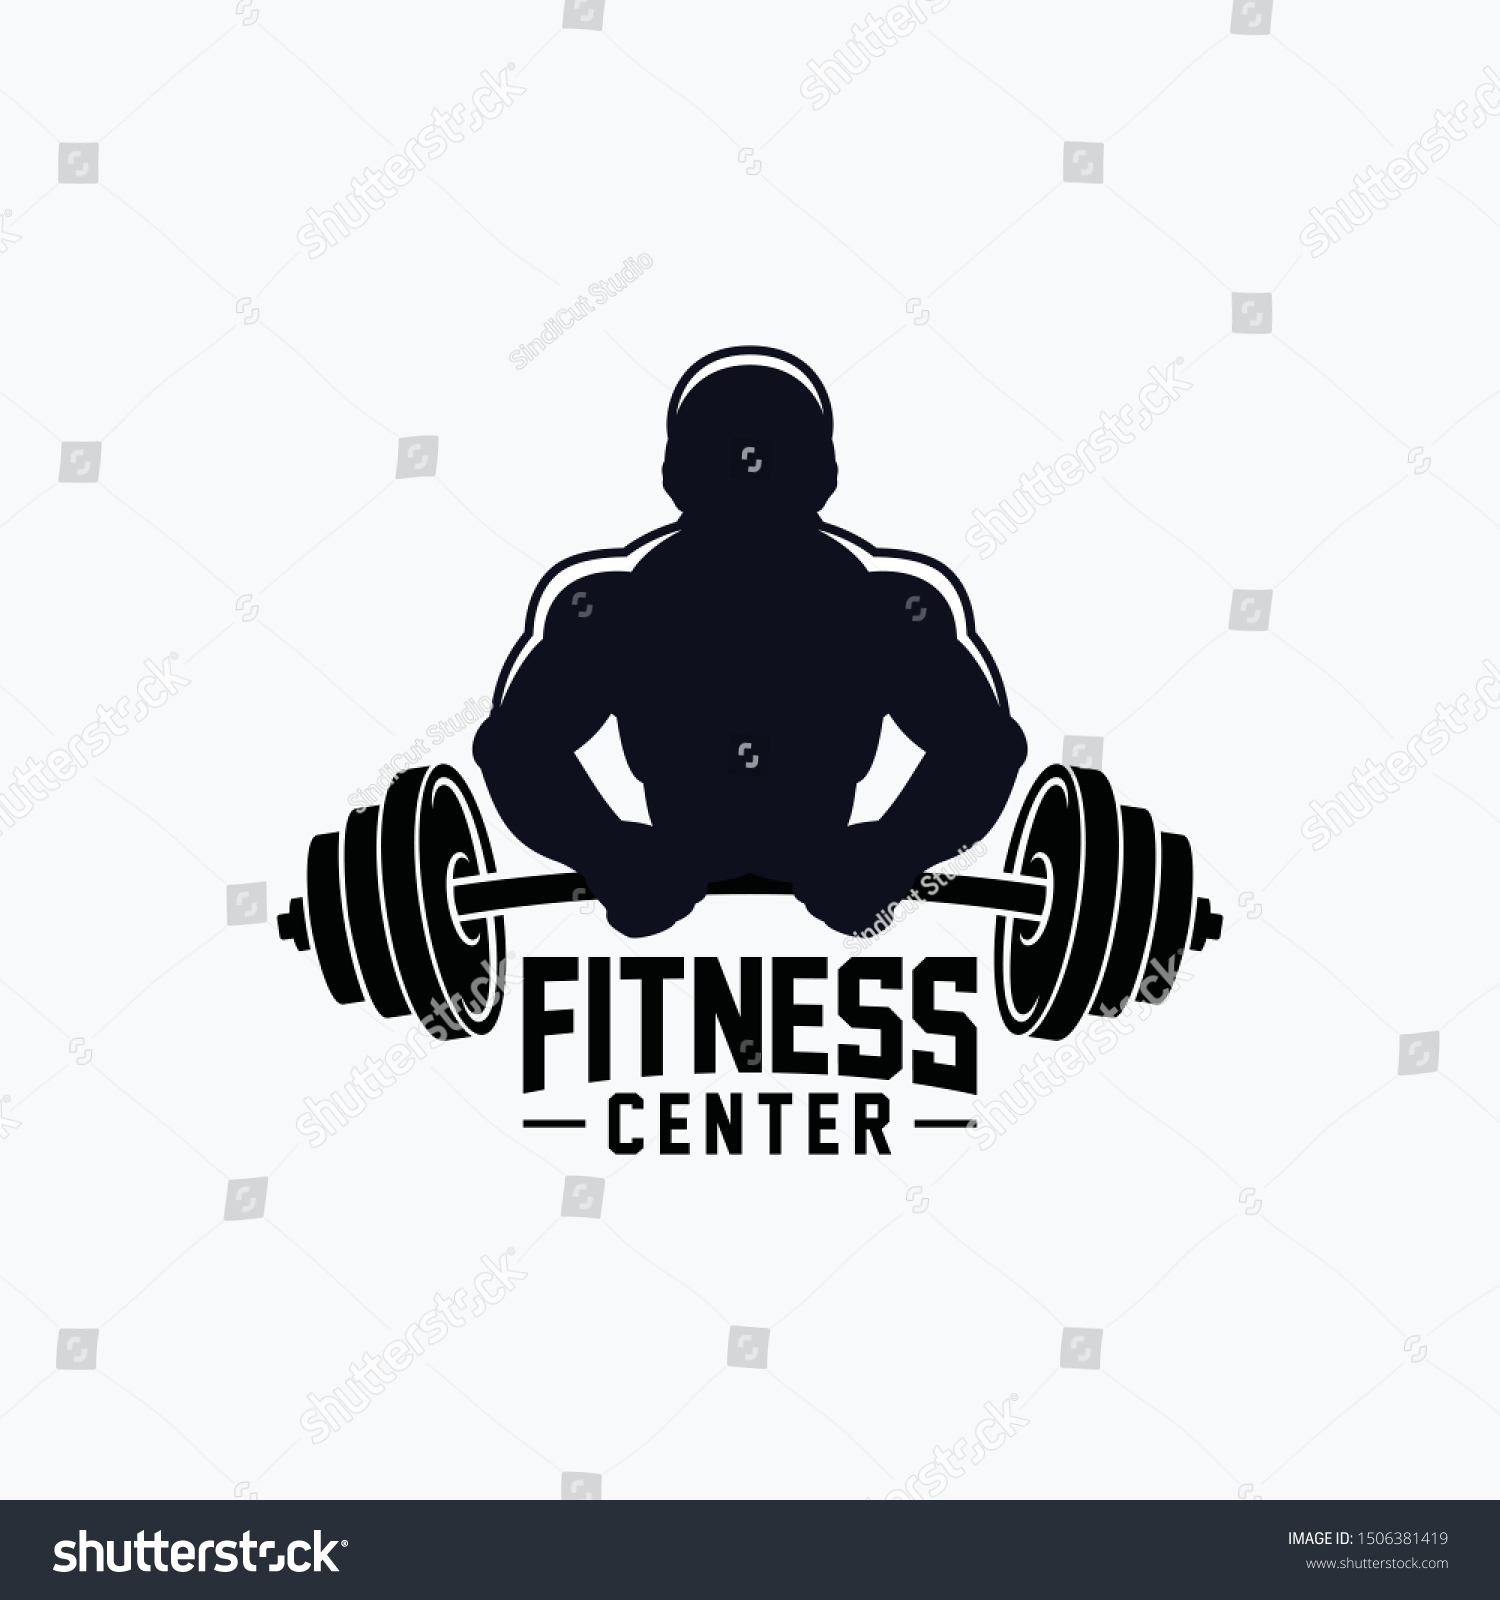 Fitness Center Logo Concept Silhouette Man Stock Vector (Royalty Free ...